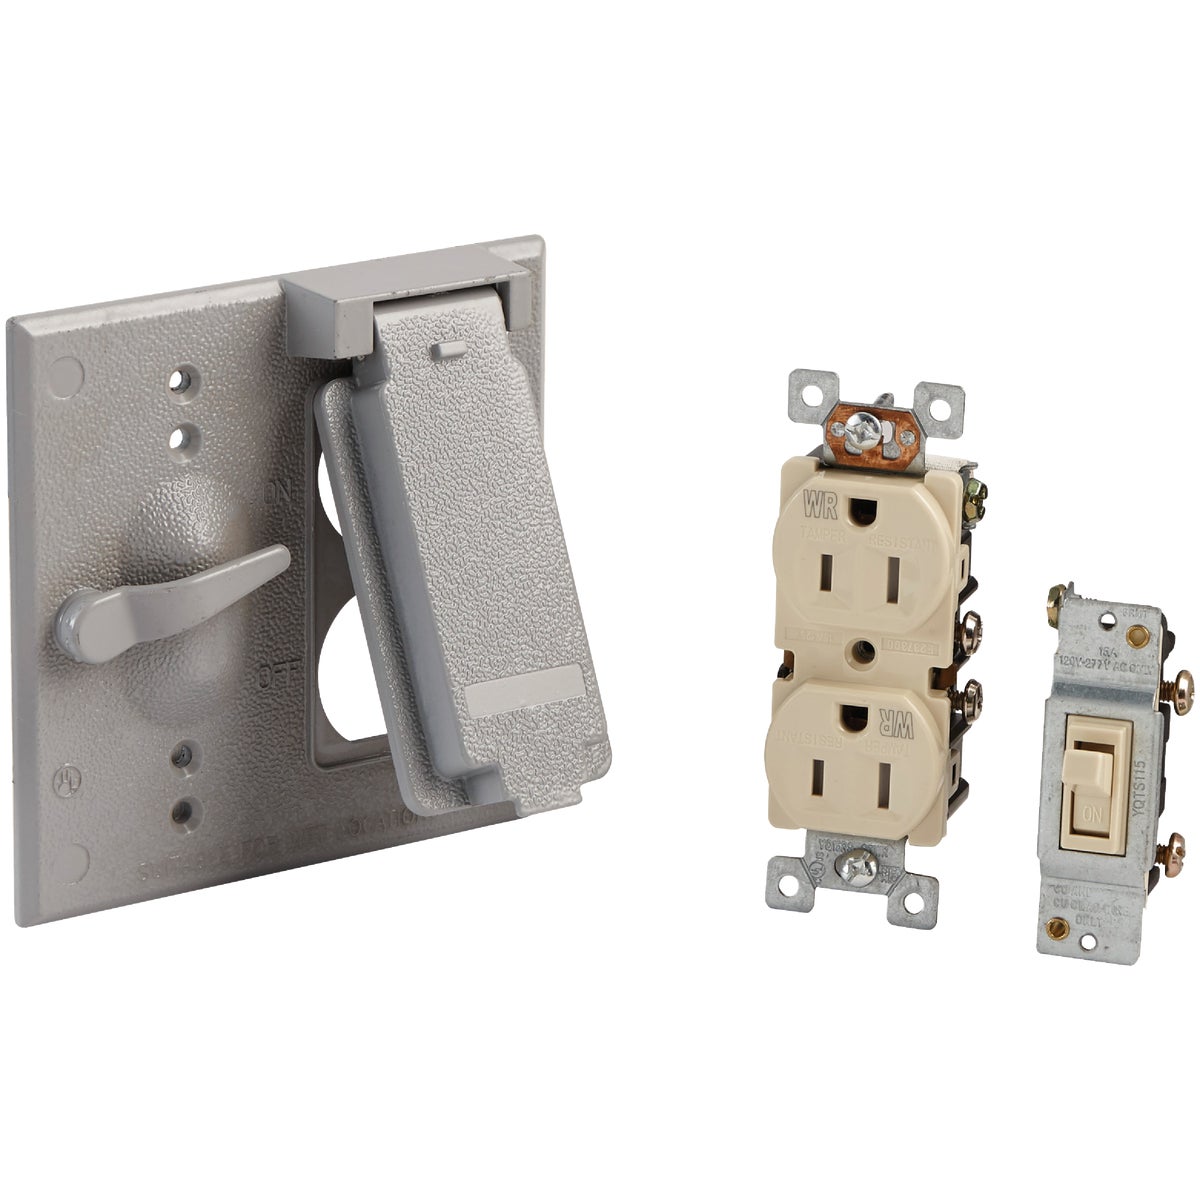 Item 502732, Durable die-cast construction, weatherproof switch and outlet cover.